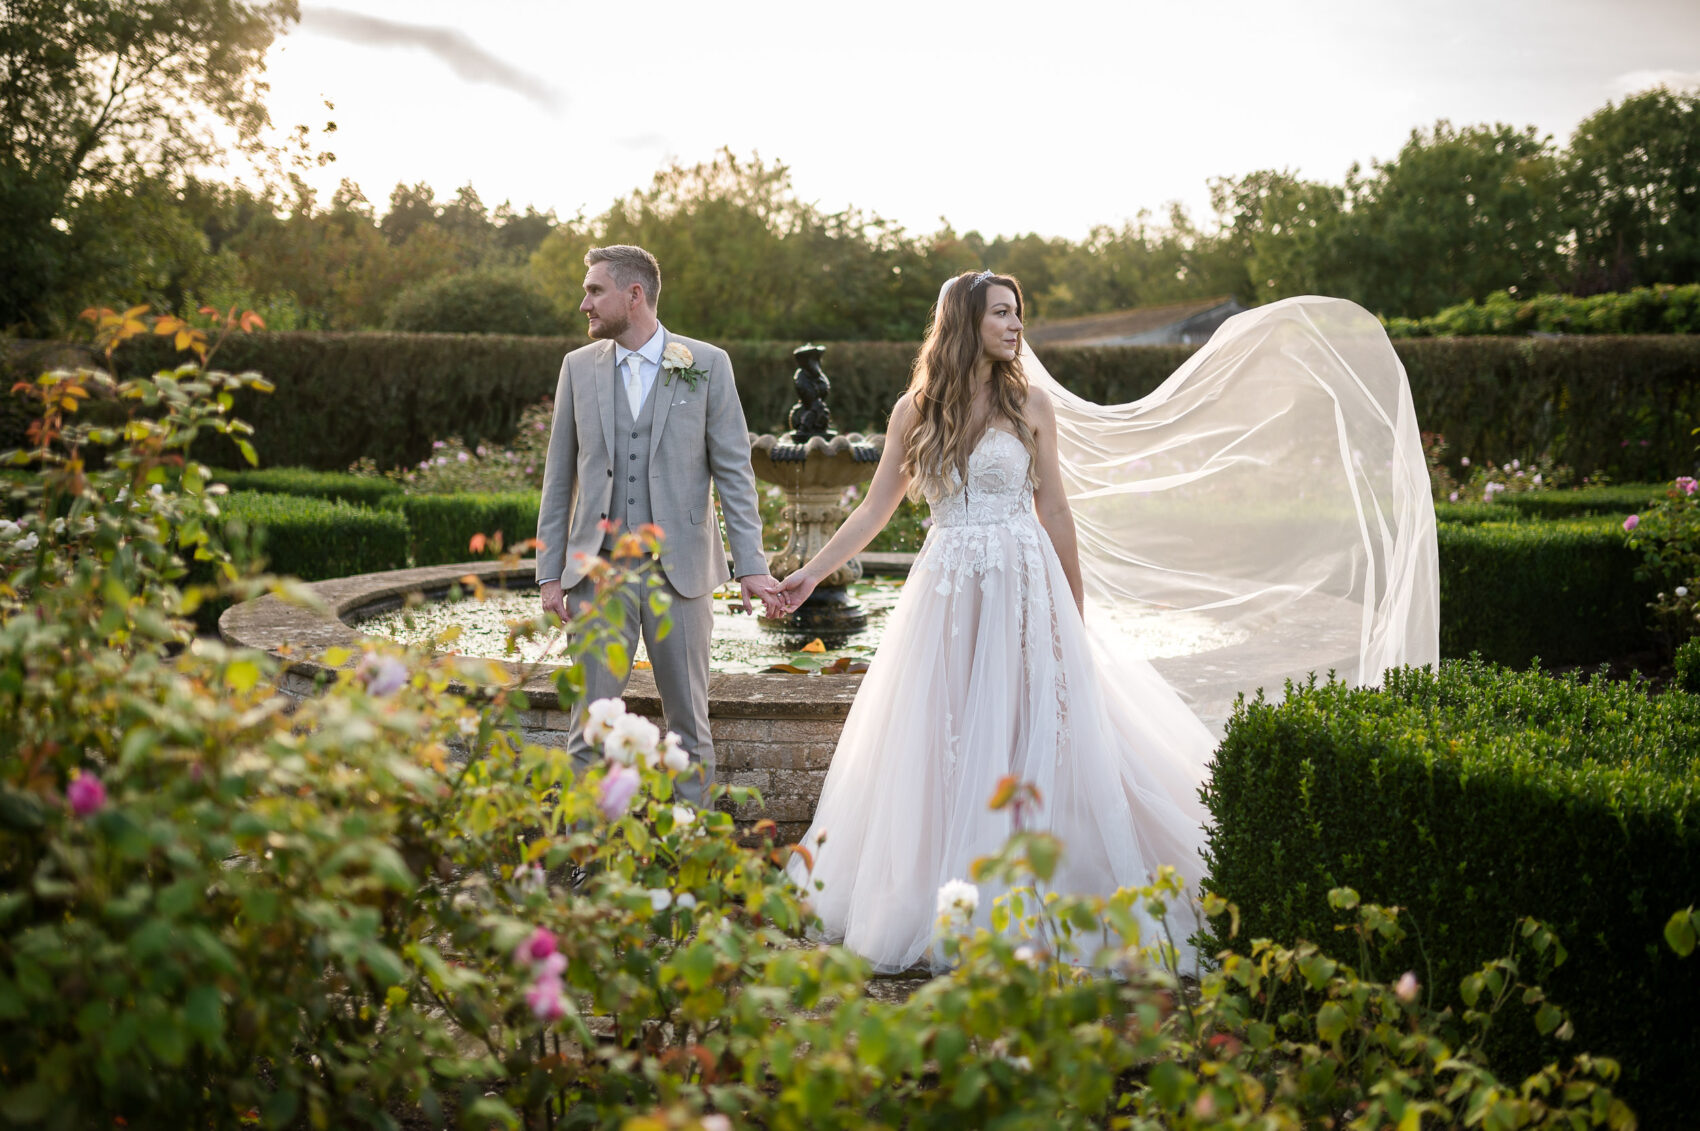 Bride and groom pose for formal photos in walled garden at Hethfelton House wedding